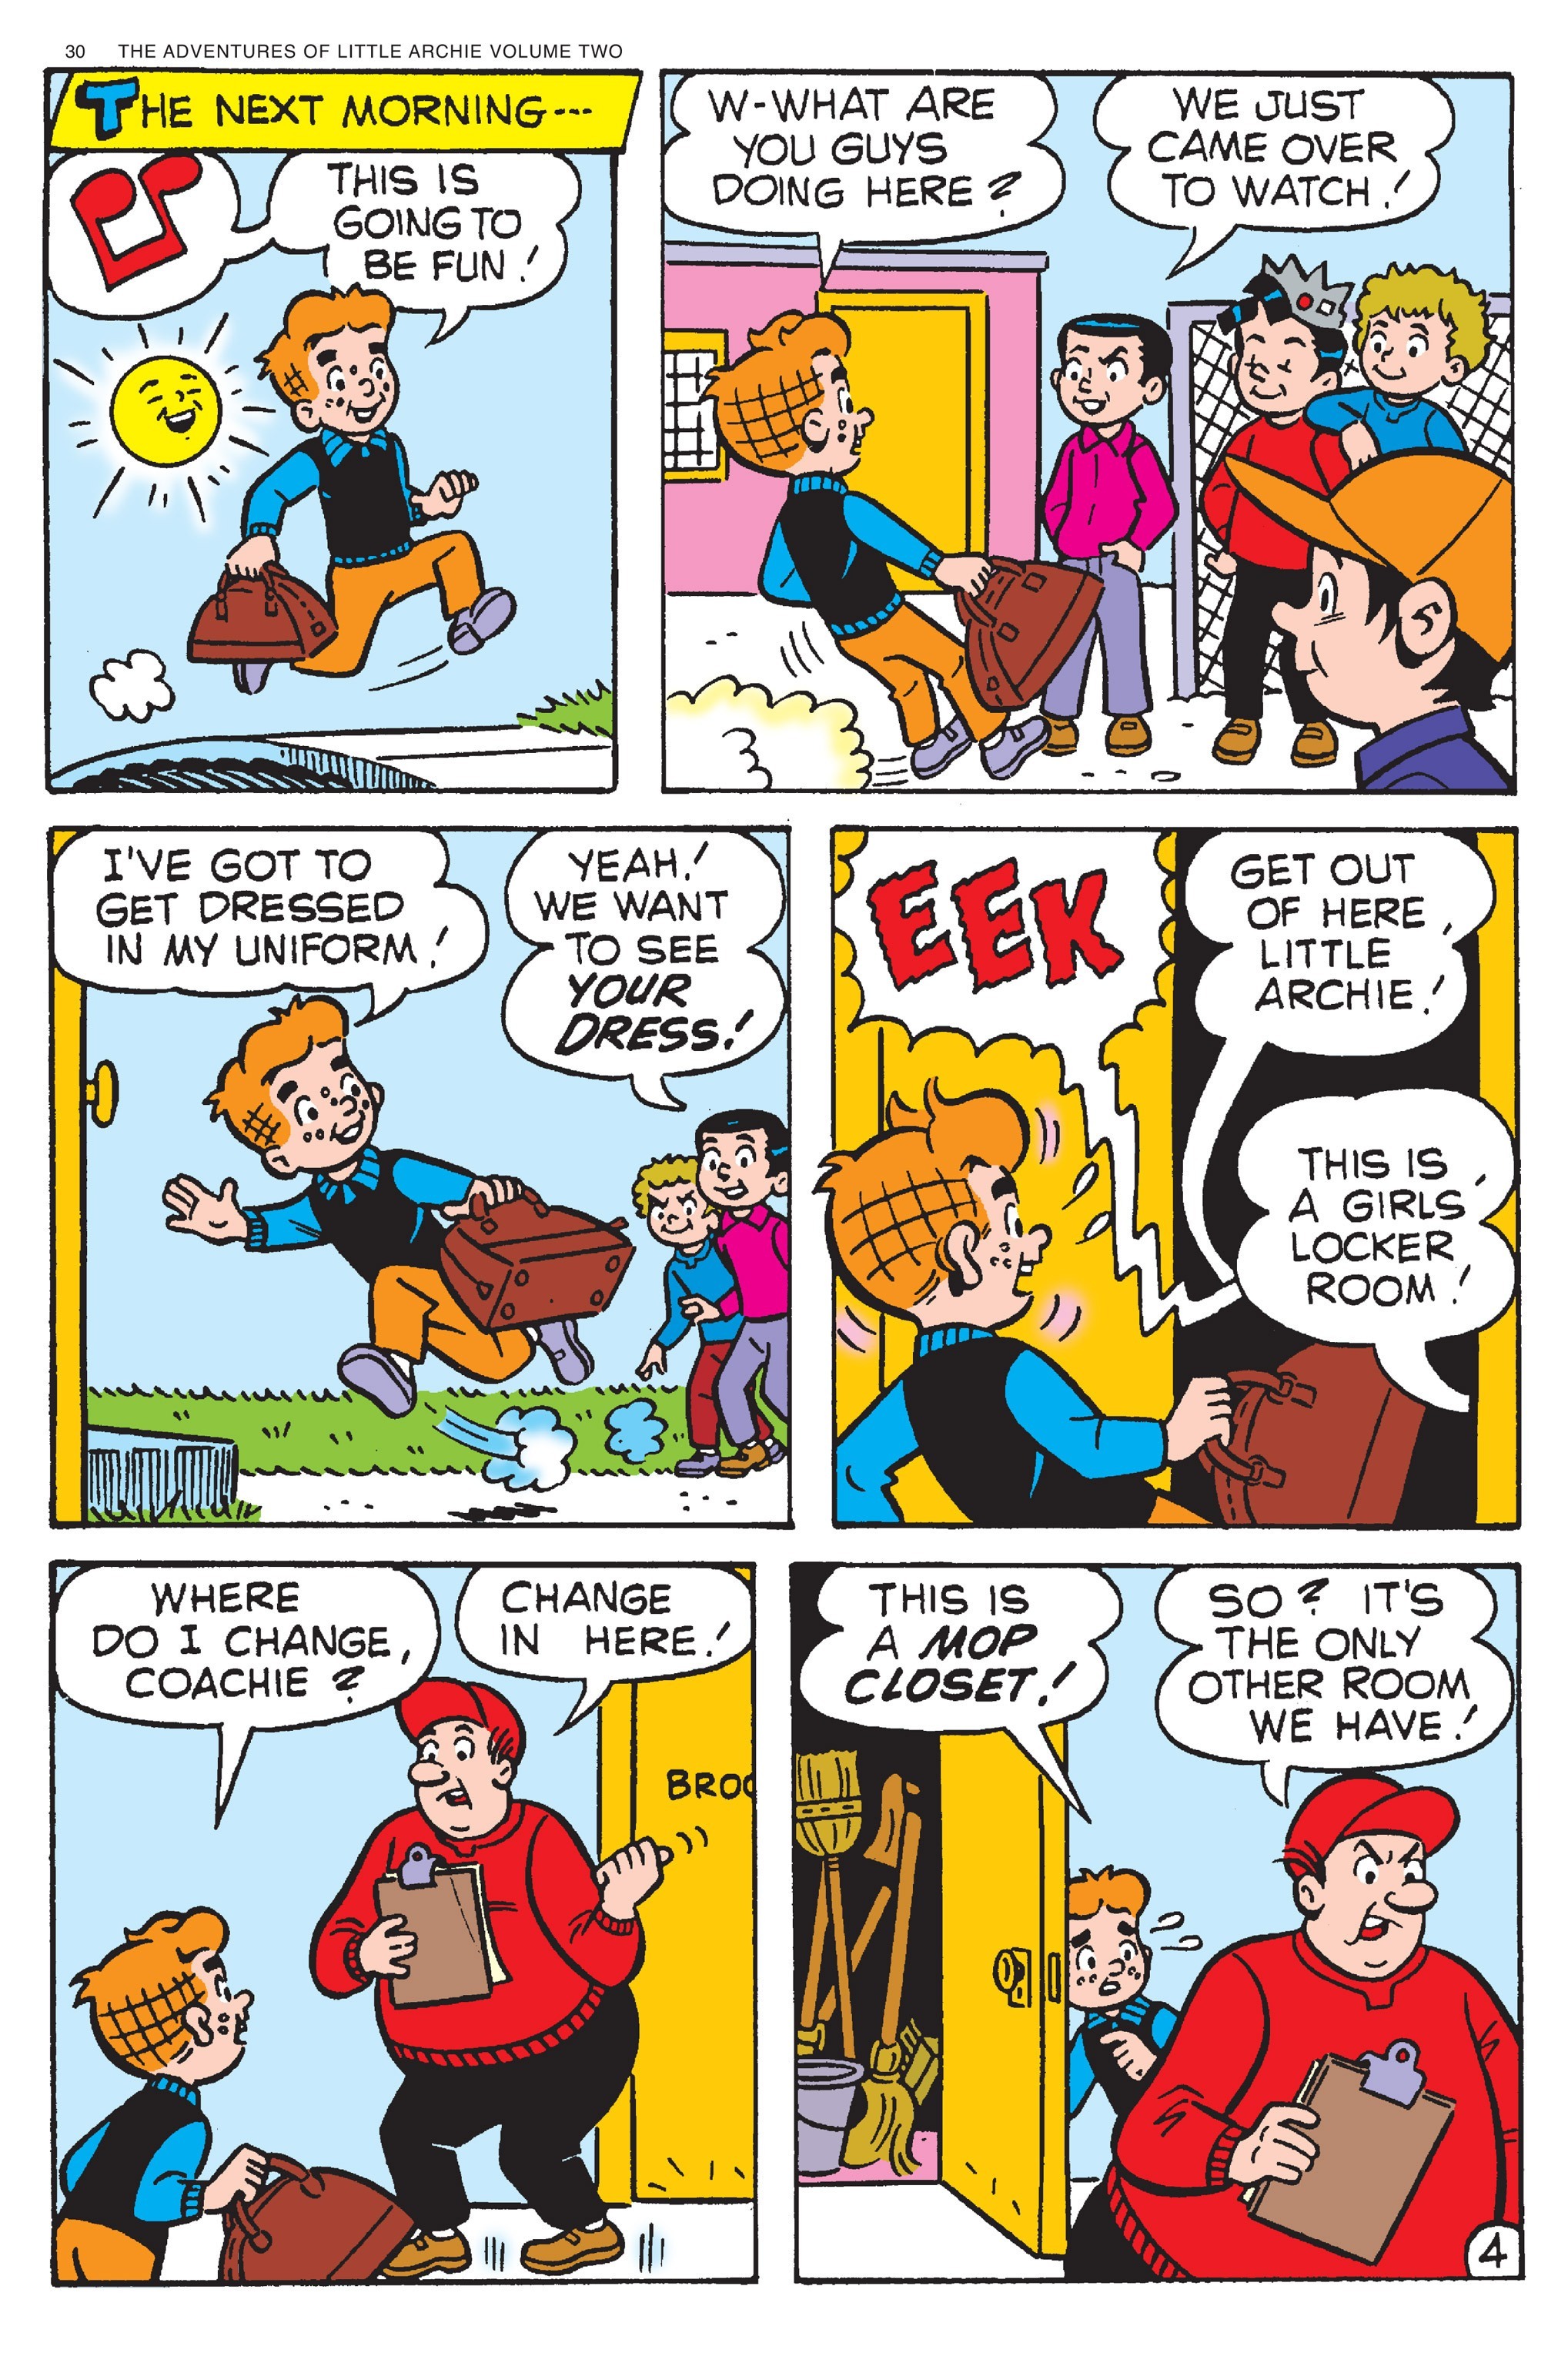 Read online Adventures of Little Archie comic -  Issue # TPB 2 - 31